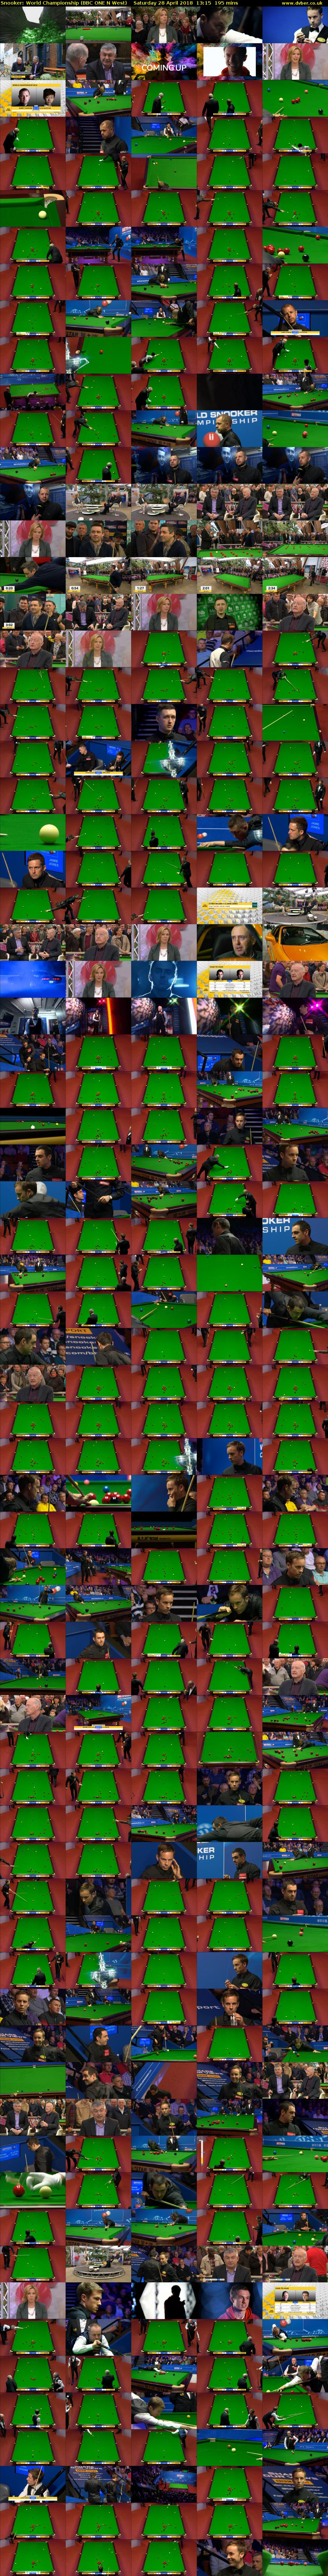 Snooker: World Championship (BBC ONE N West) Saturday 28 April 2018 13:15 - 16:30